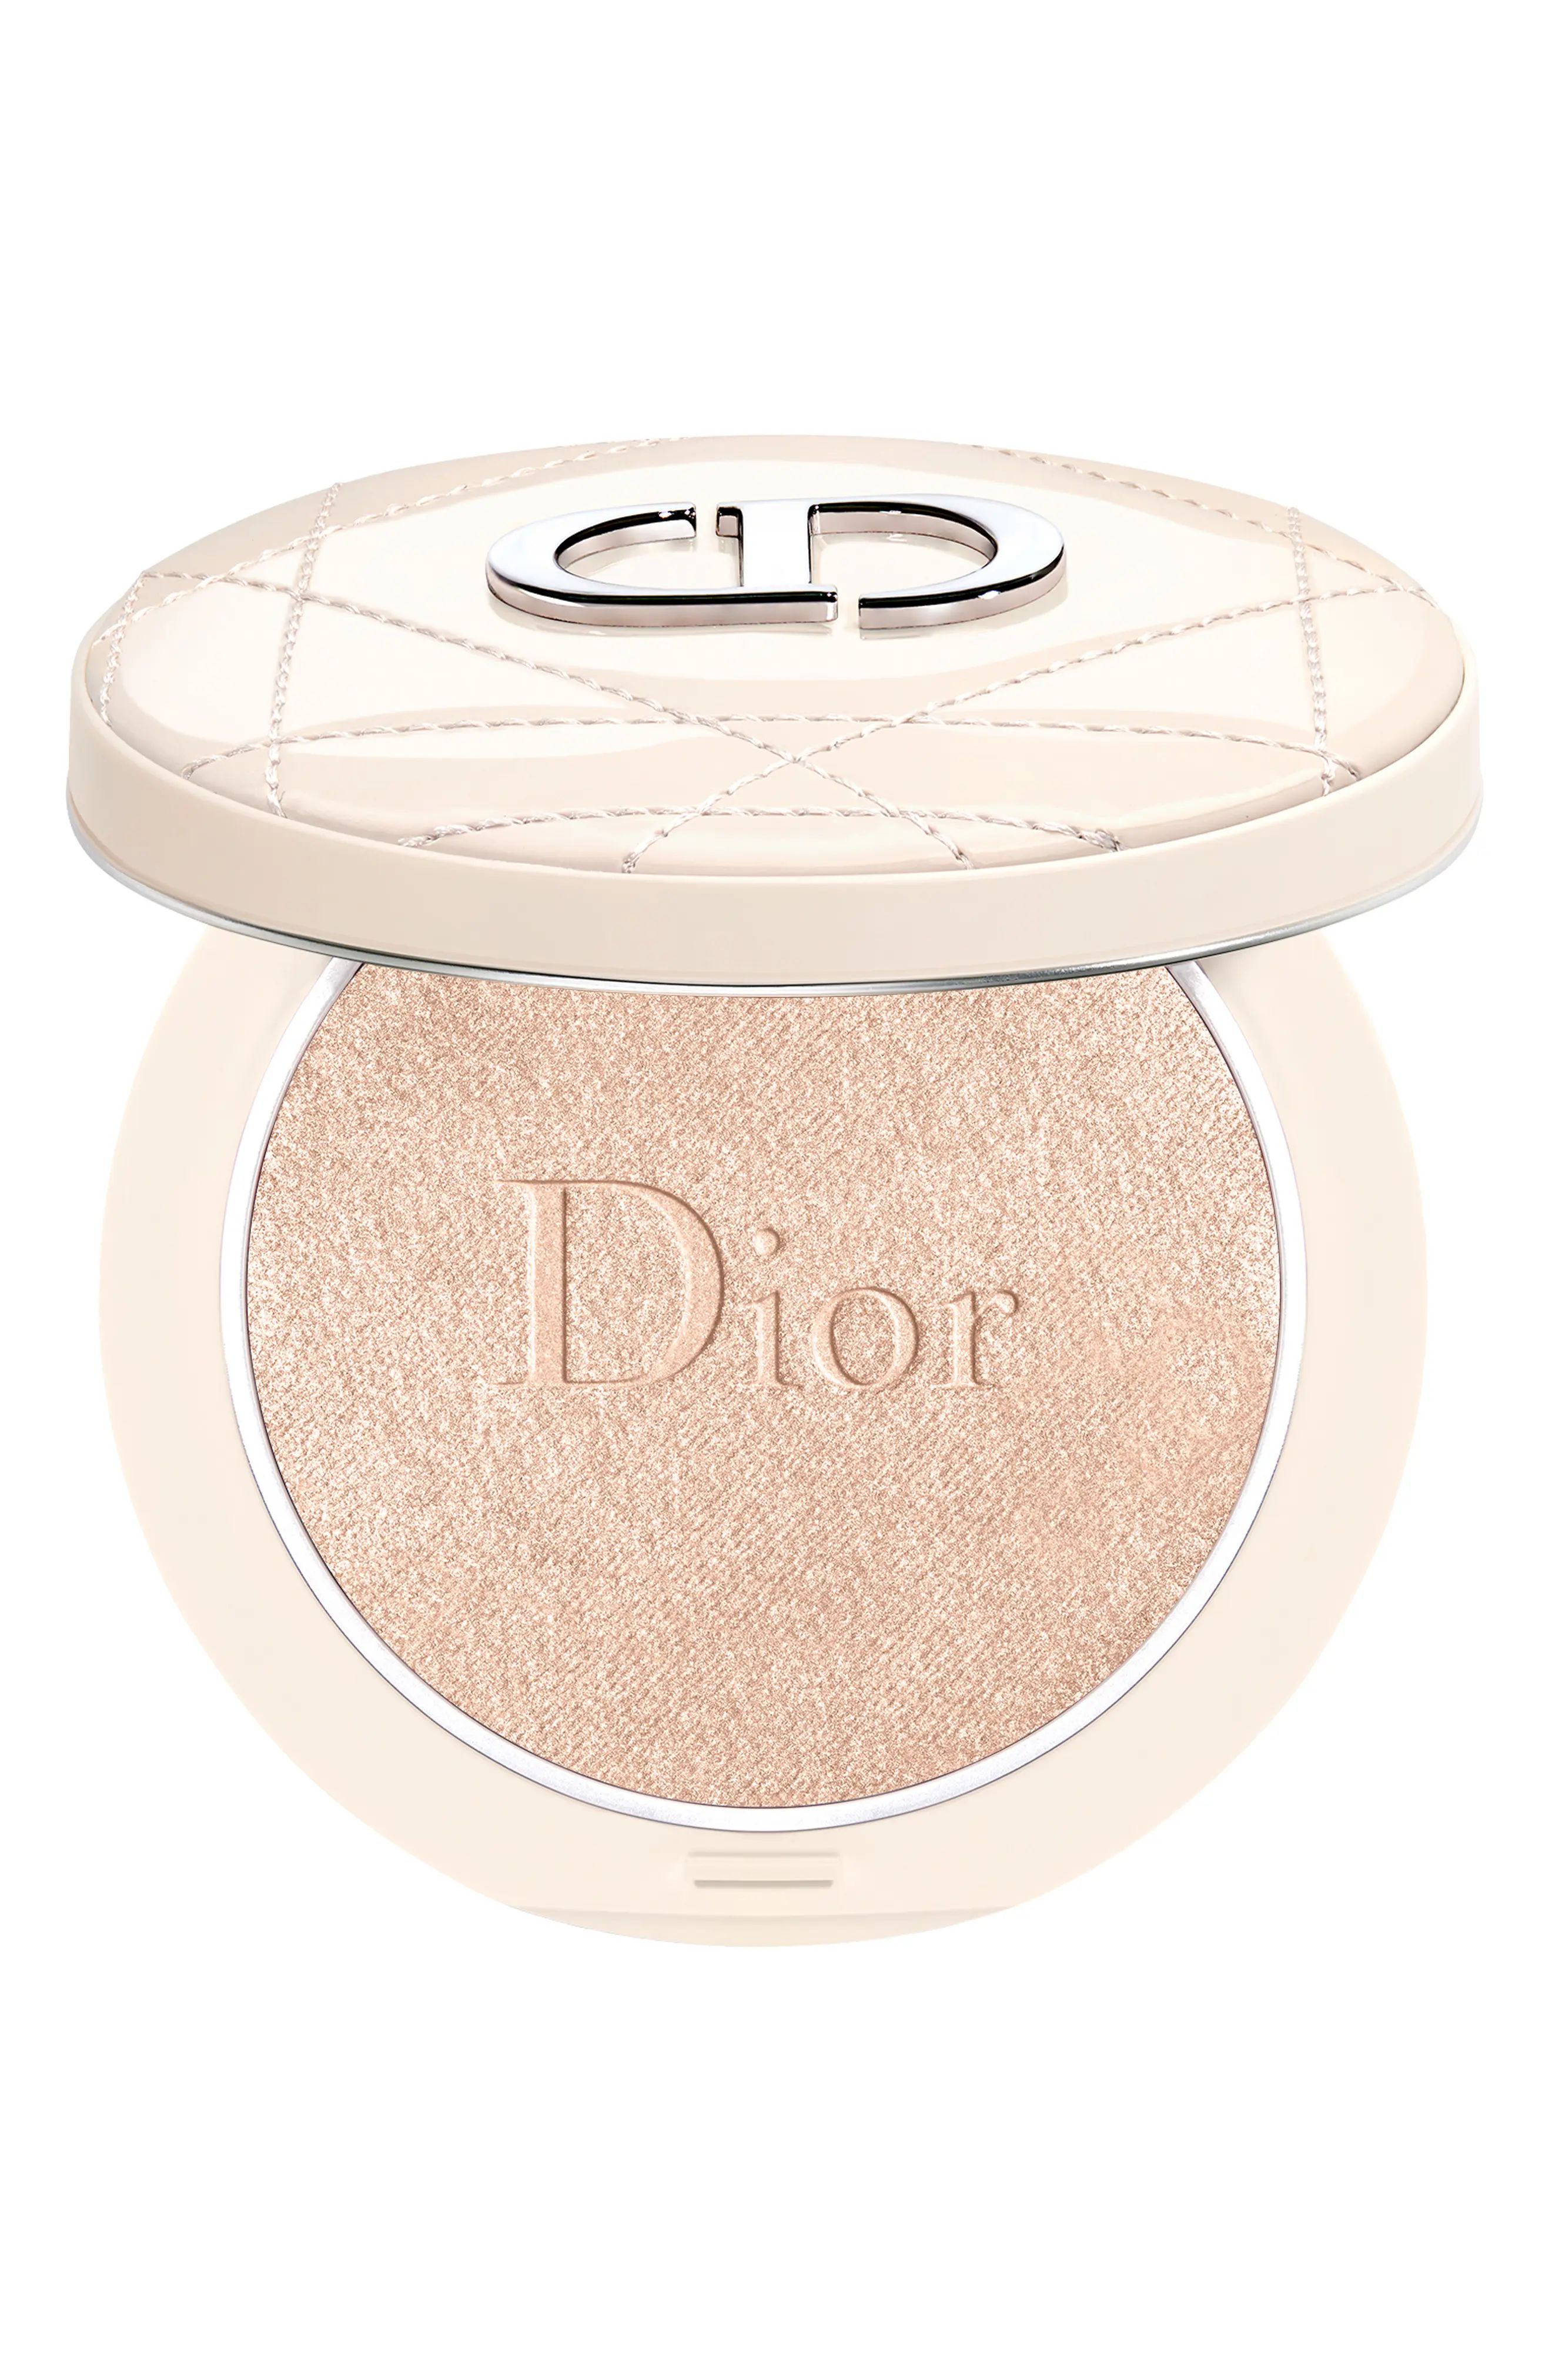 Dior Forever Couture Luminizer Highlighter Powder in 01 Nude Glow at Nordstrom | Nordstrom